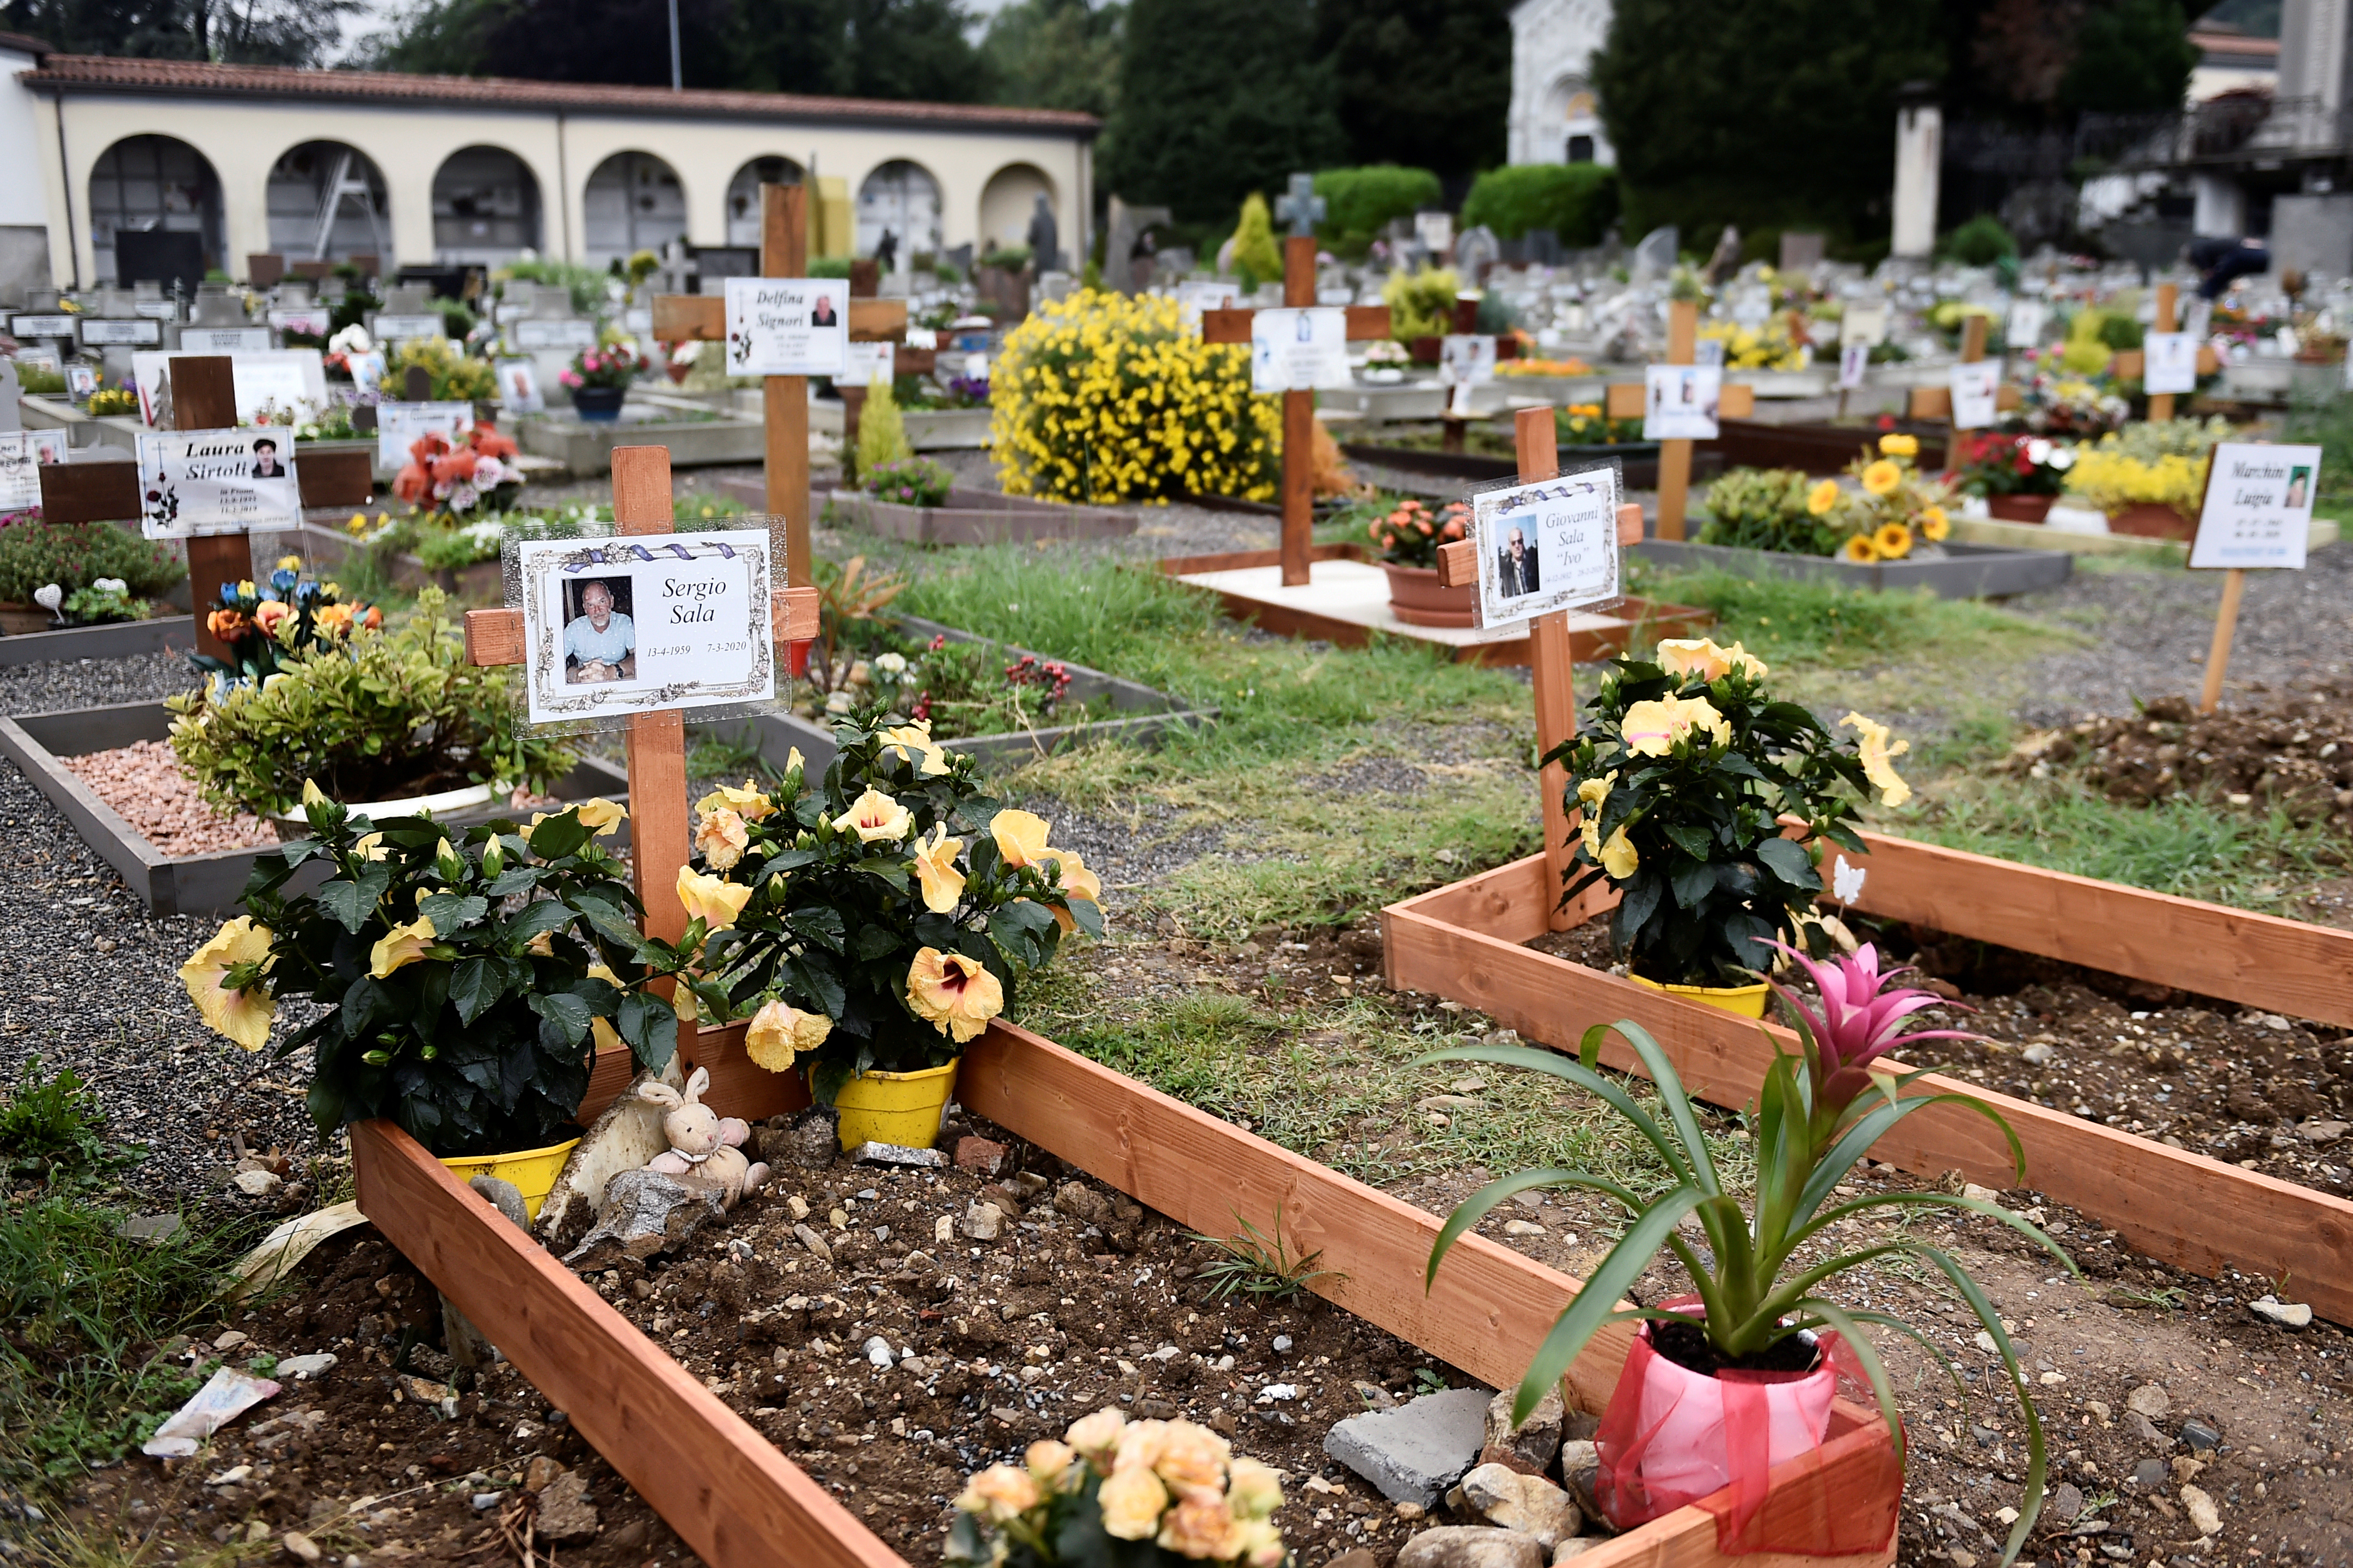 Graves of people who had recently died due to COVID-19 are seen at the cemetery of Nembro, near Bergamo